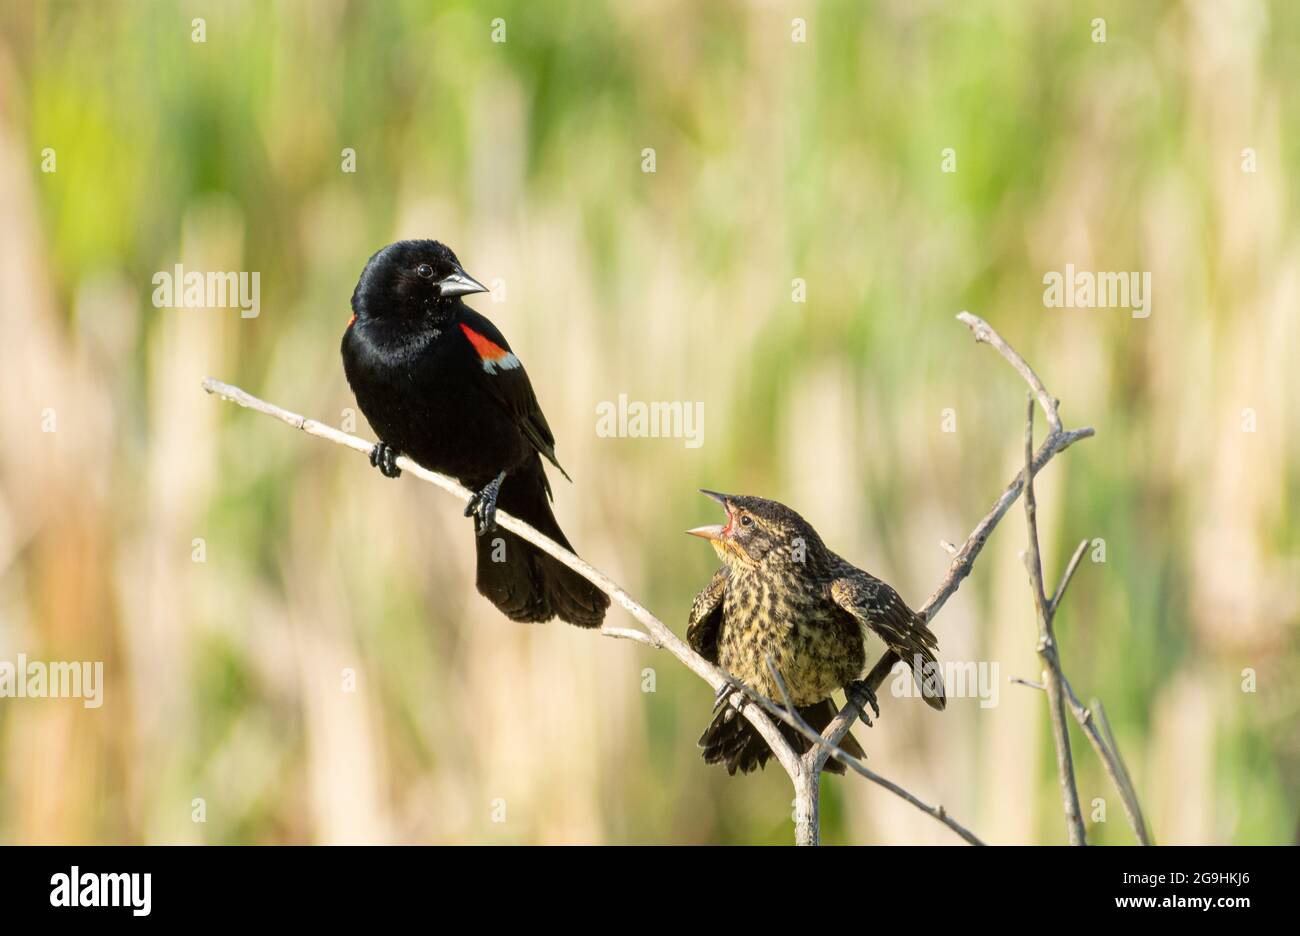 A fledgling red-winged blackbird, Agelaius phoeniceus, begging for food from its male parent, central Alberta, Canada. Stock Photo